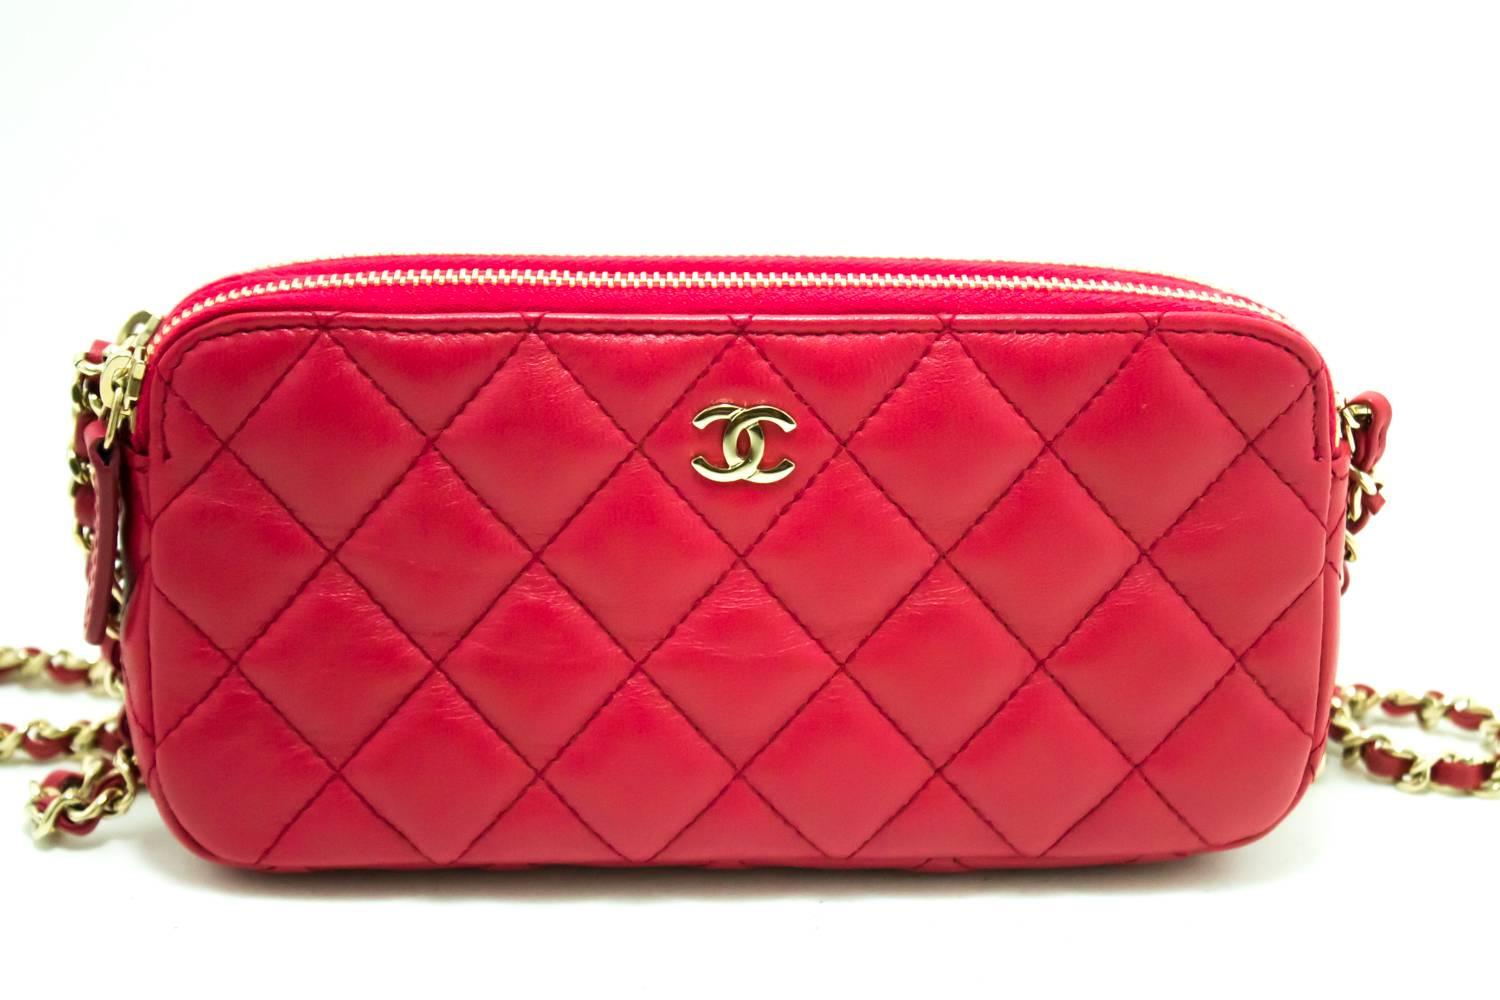 An authentic CHANEL Red Wallet On Chain WOC Double Zip Chain Shoulder Bag The outside material is made of black Lambskin.
Conditions & Ratings
Outside material: Lambskin
Color: Red
Closure: Zipper
Hardware and chain: Gold-tone
Made in Italy
Serial